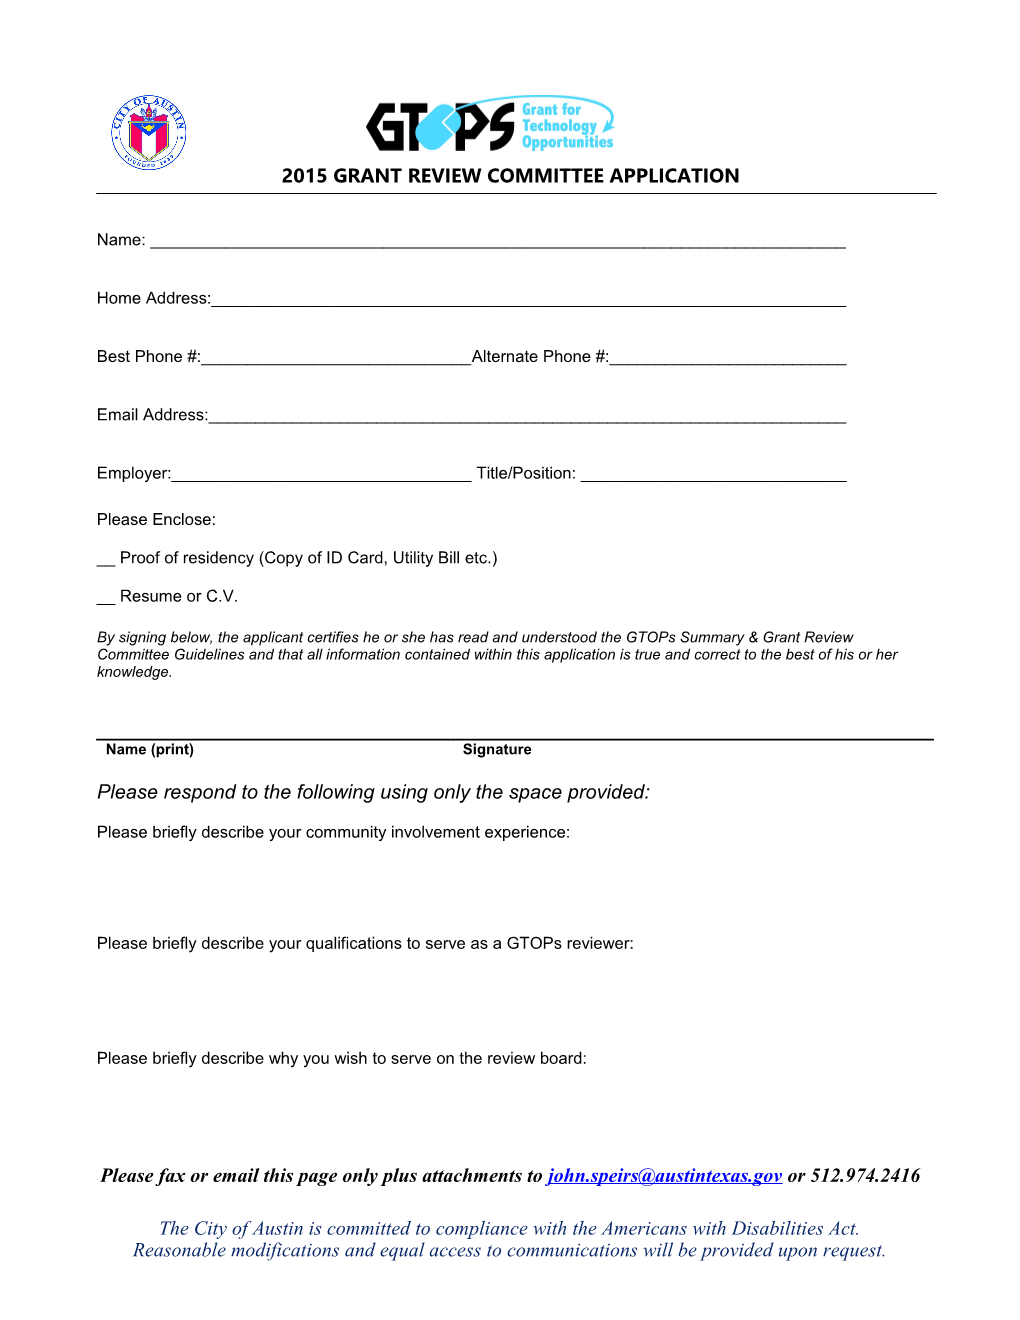 Applications Due: January 31, 2003, 4:45 PM